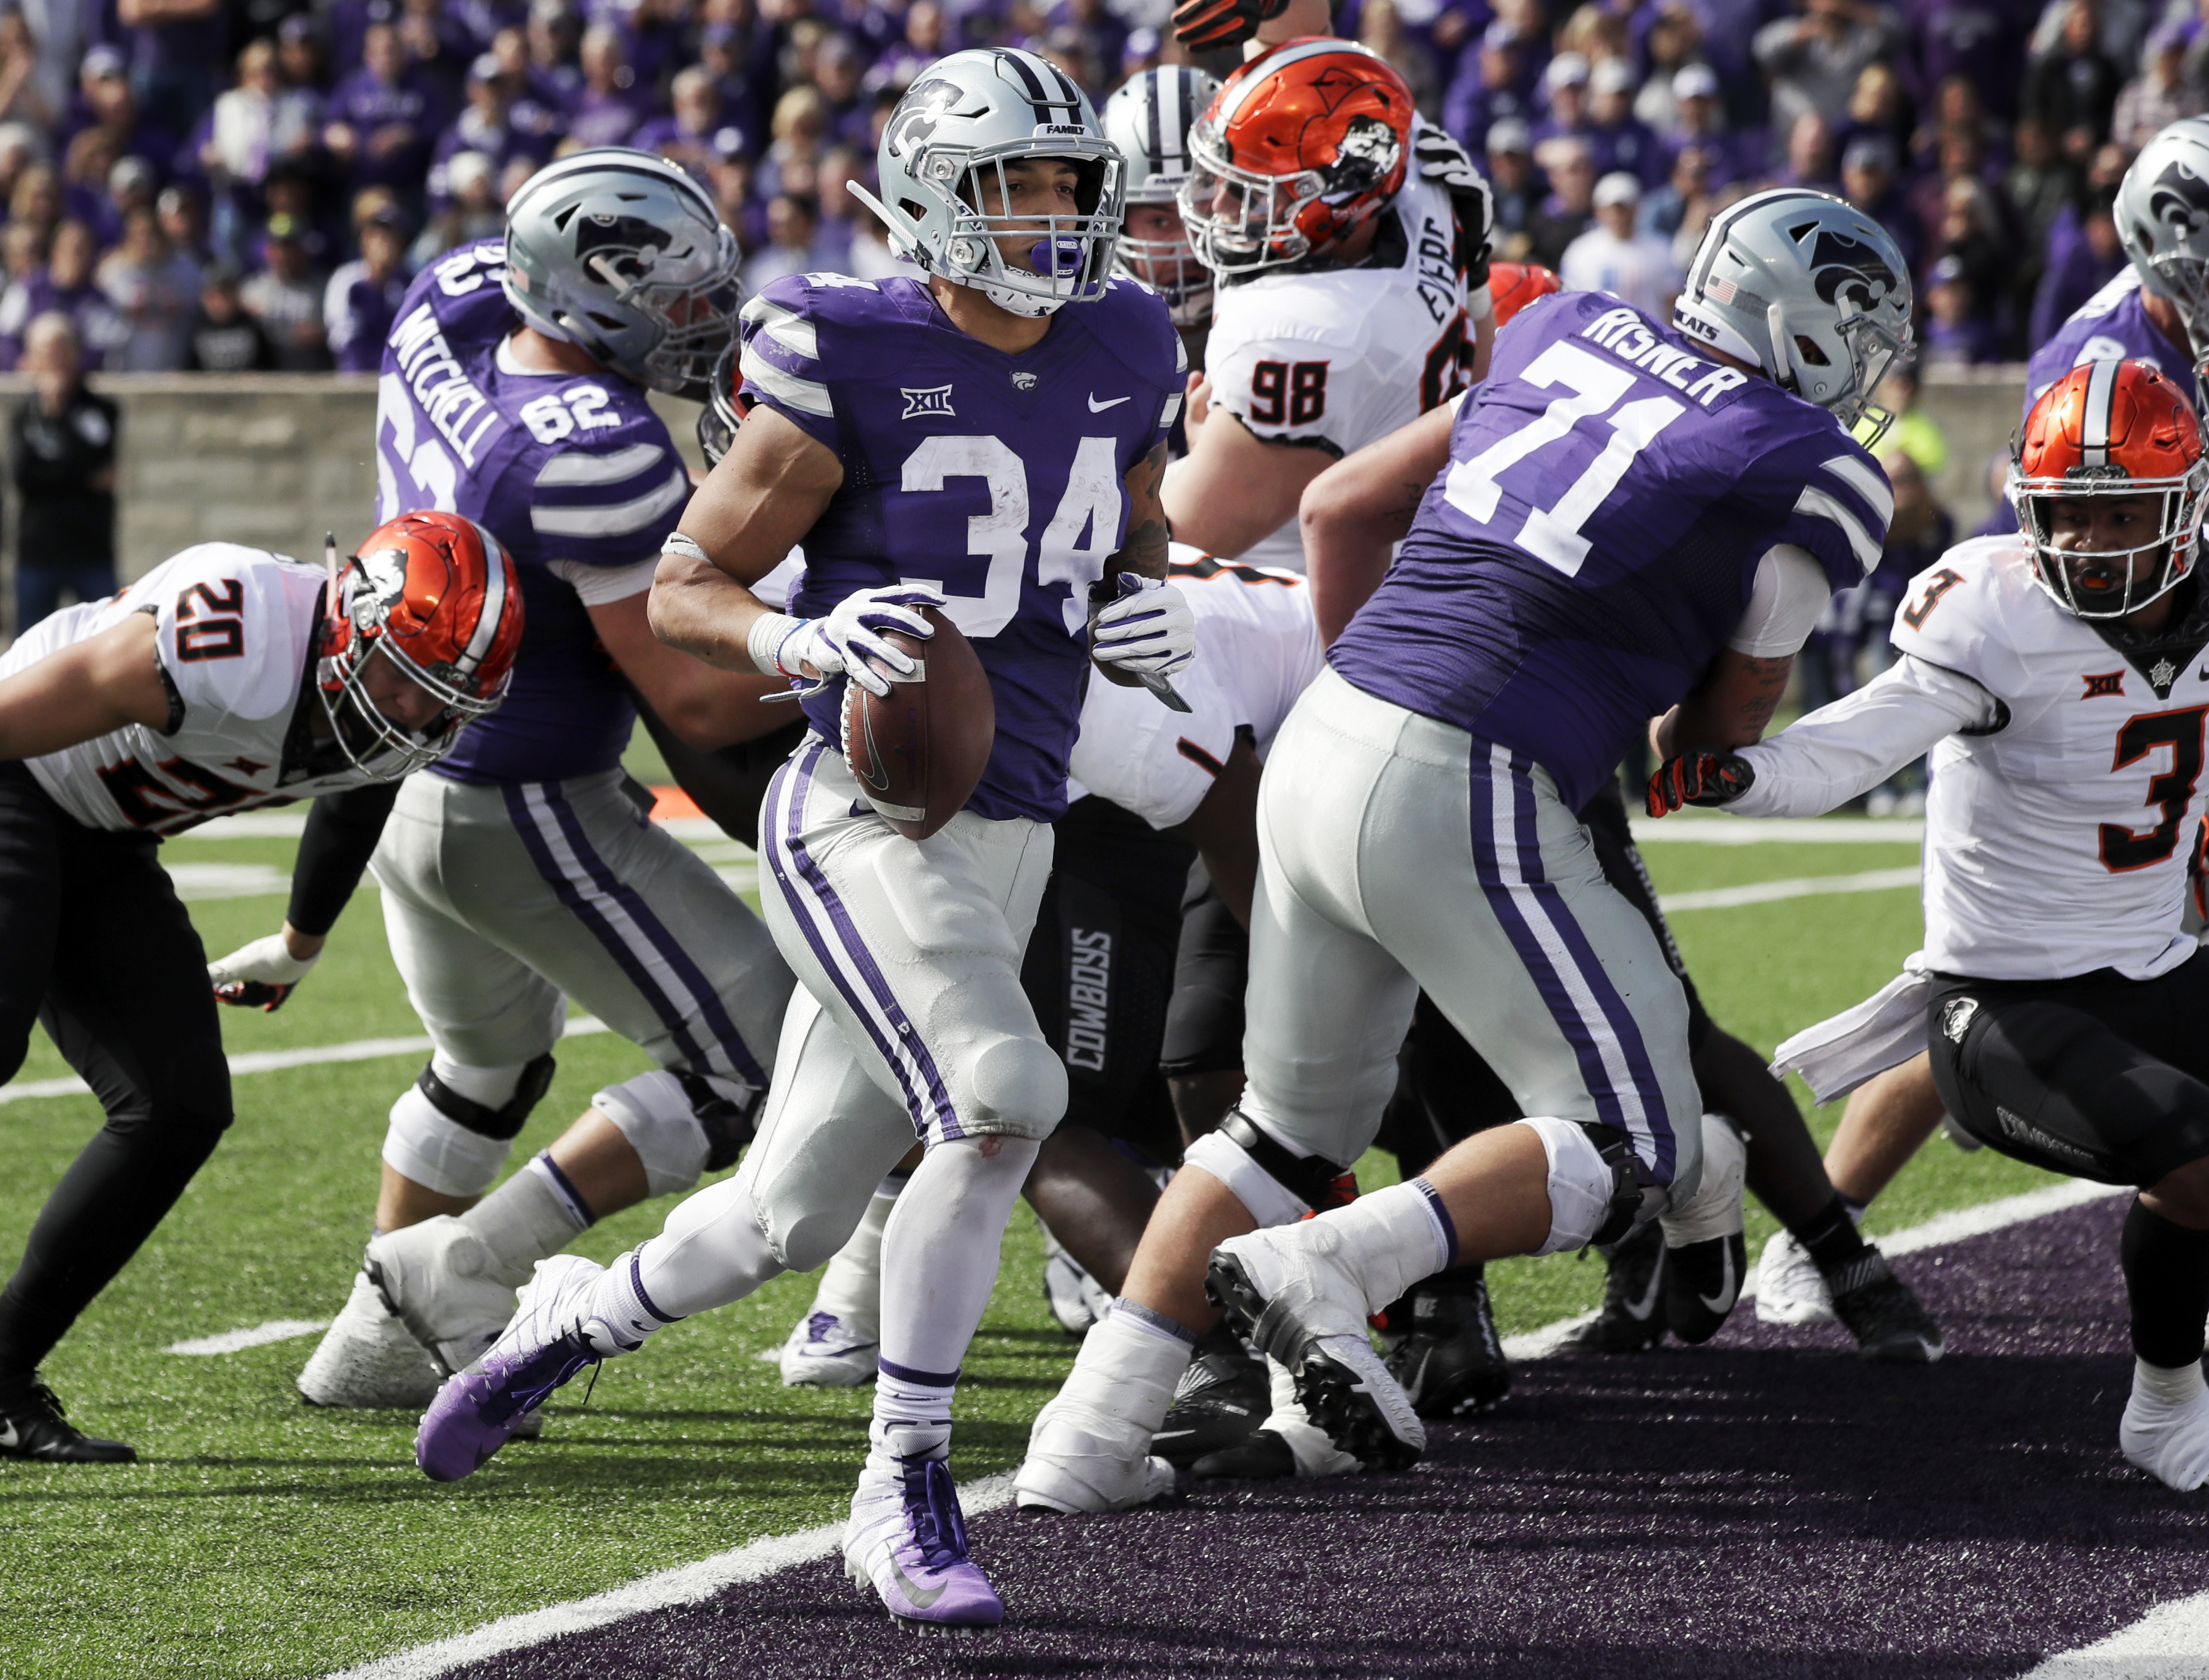 Barnes runs for 4 TDs as K-State routs Oklahoma State, 31-12